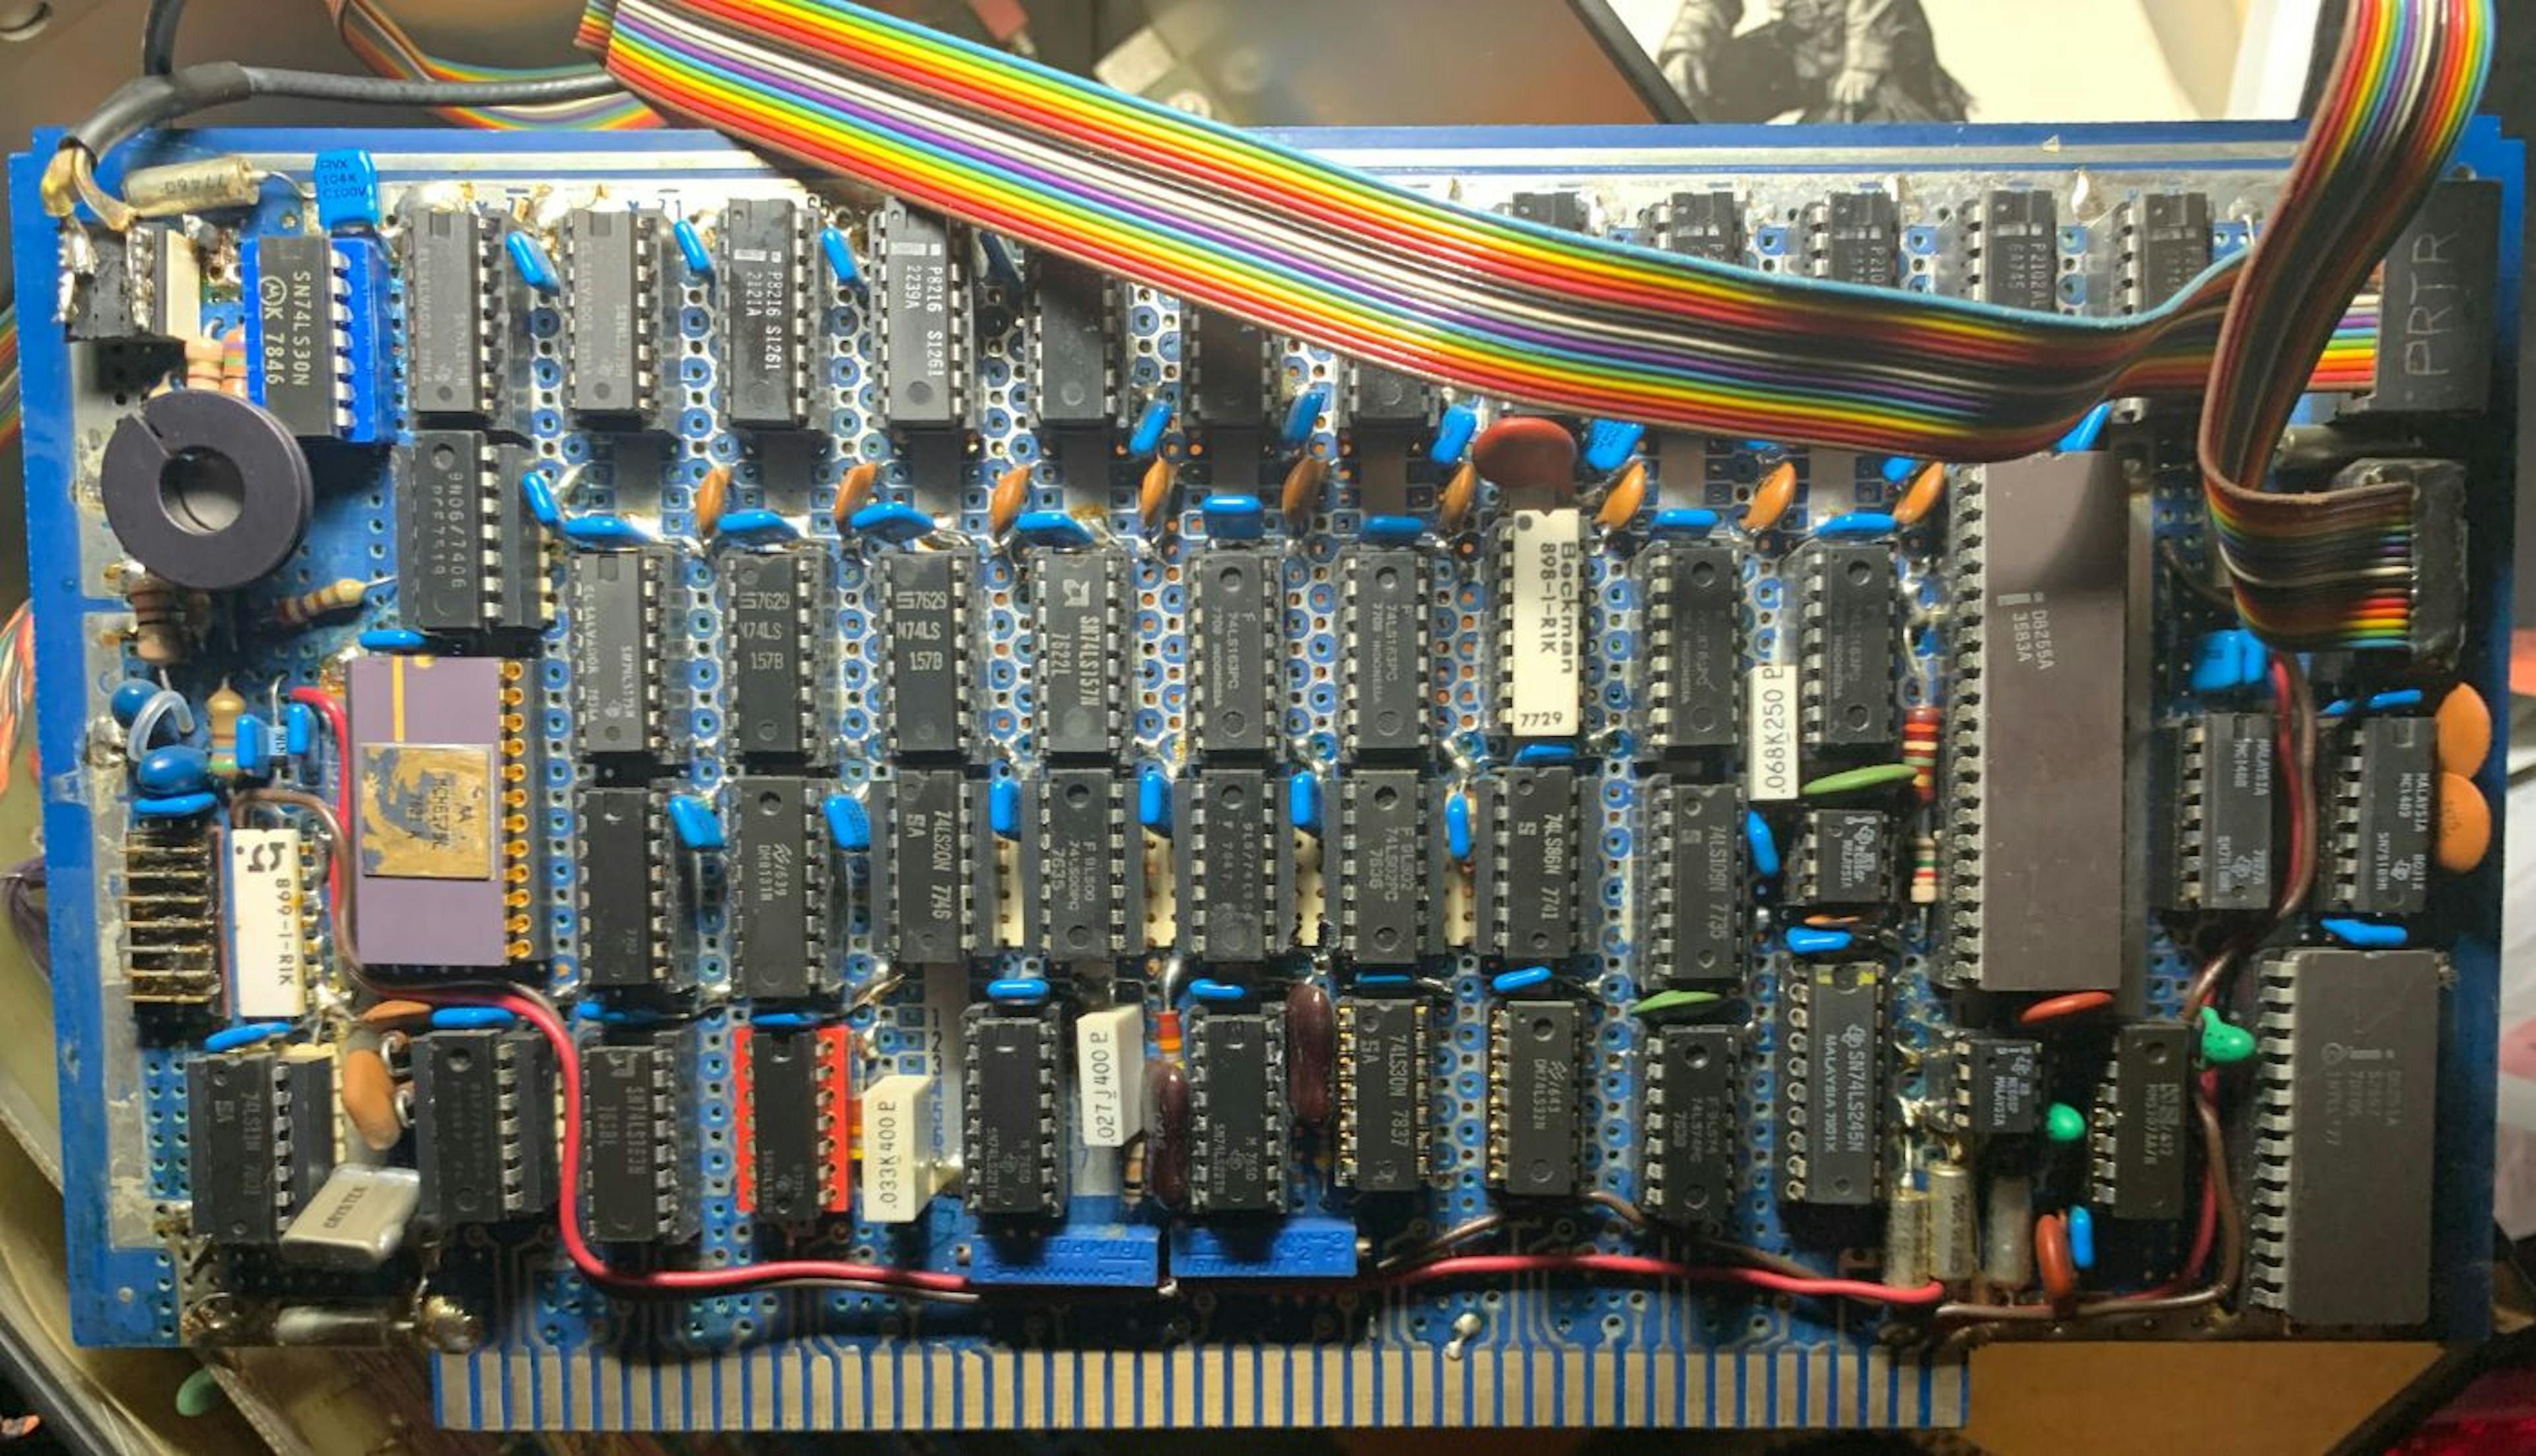 Video and I/O board front